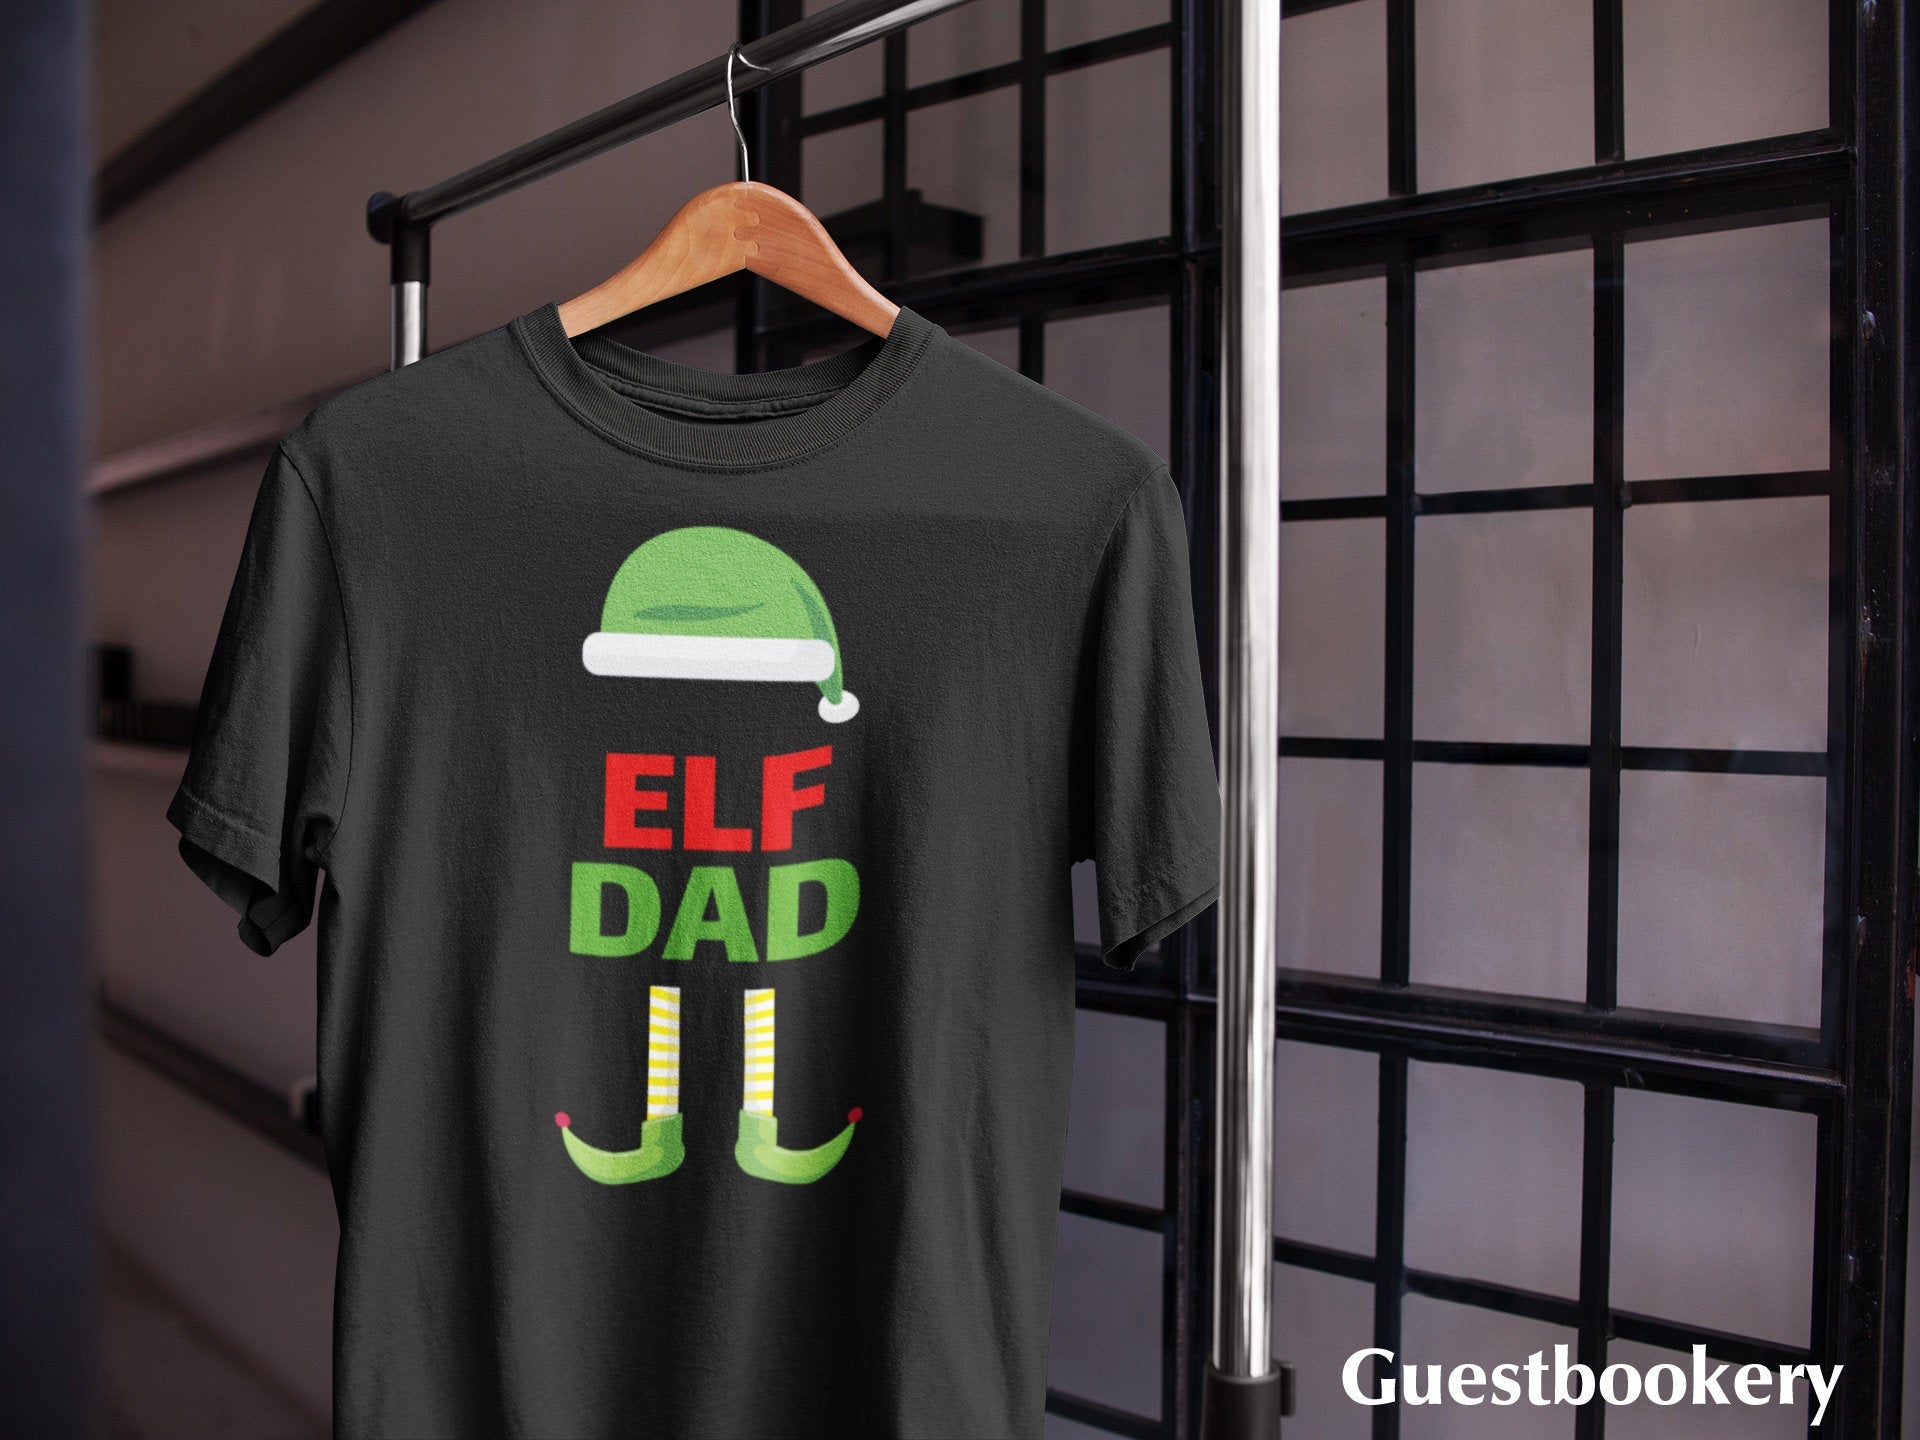 Elf Dad T-shirt - Guestbookery